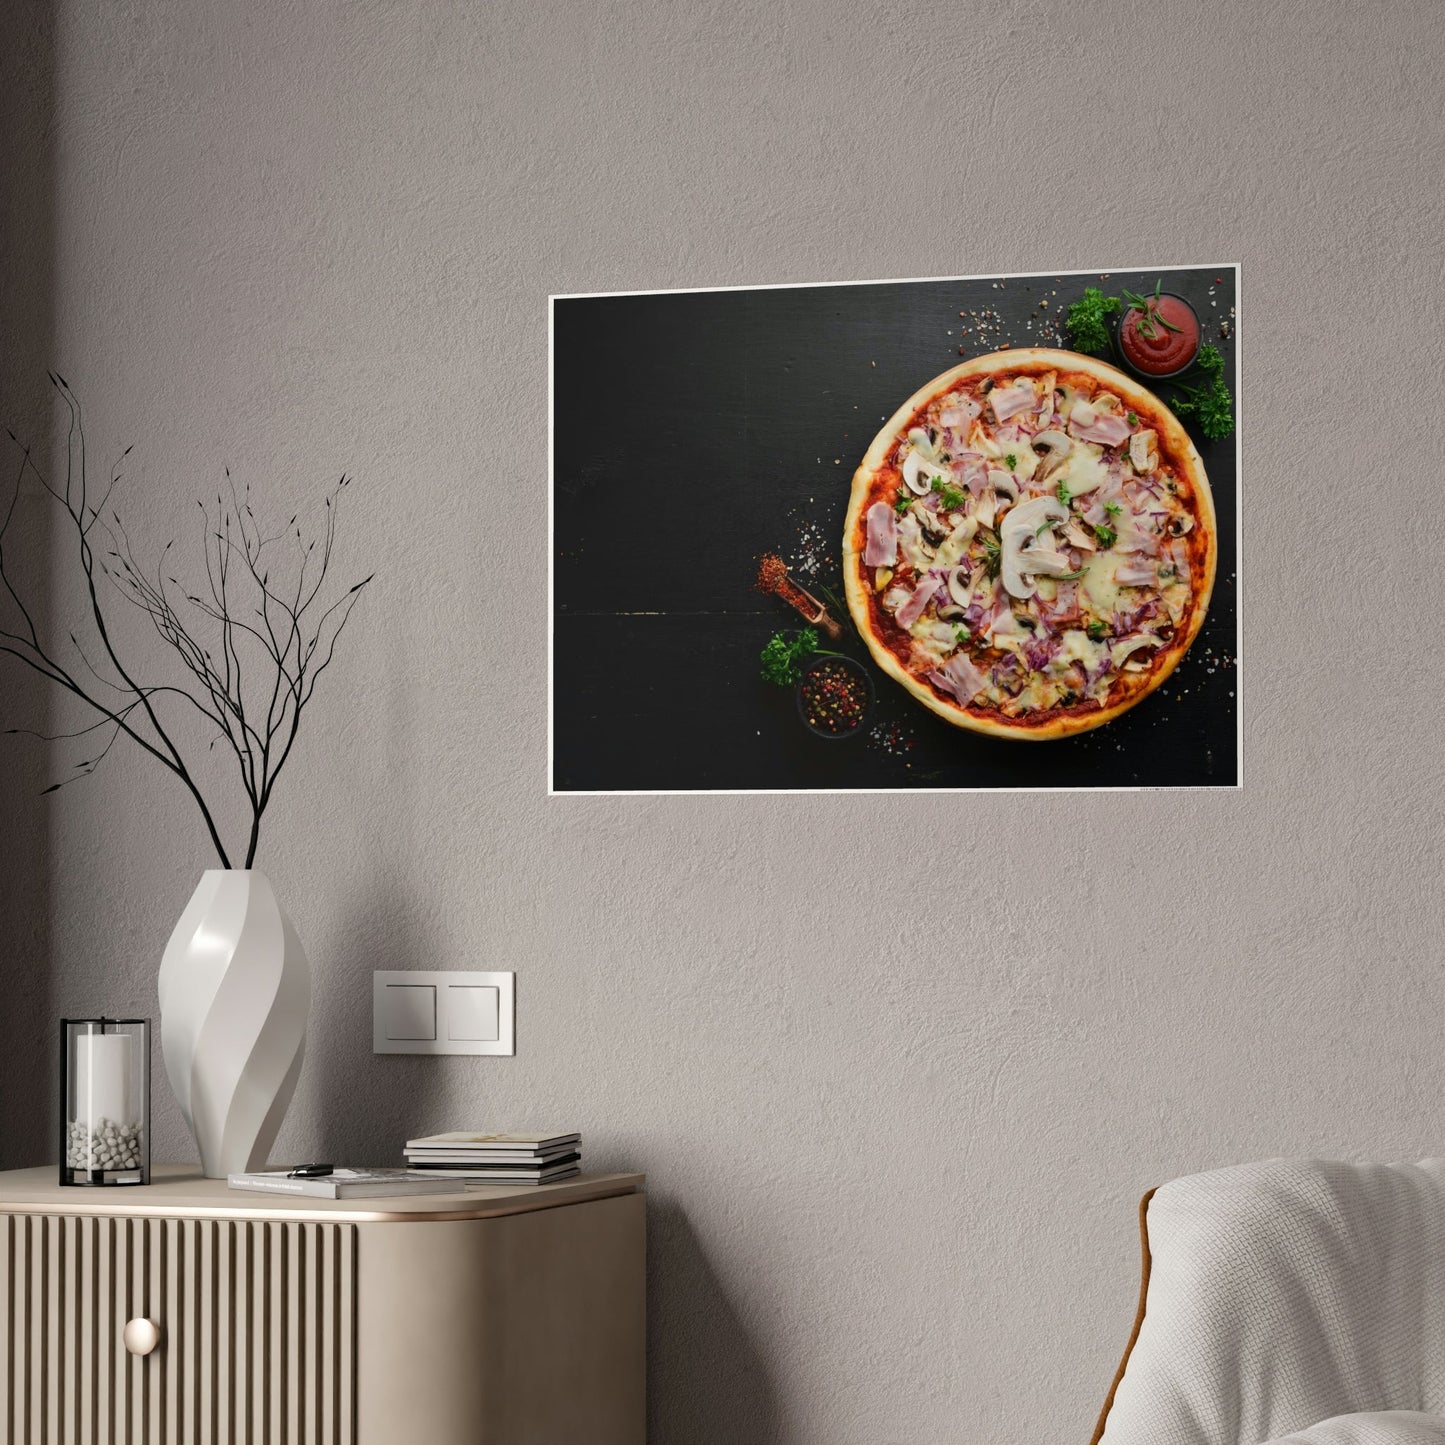 Delicious Delight: Natural Canvas Wall Art of Mouth-Watering Pizza Images for Foodies